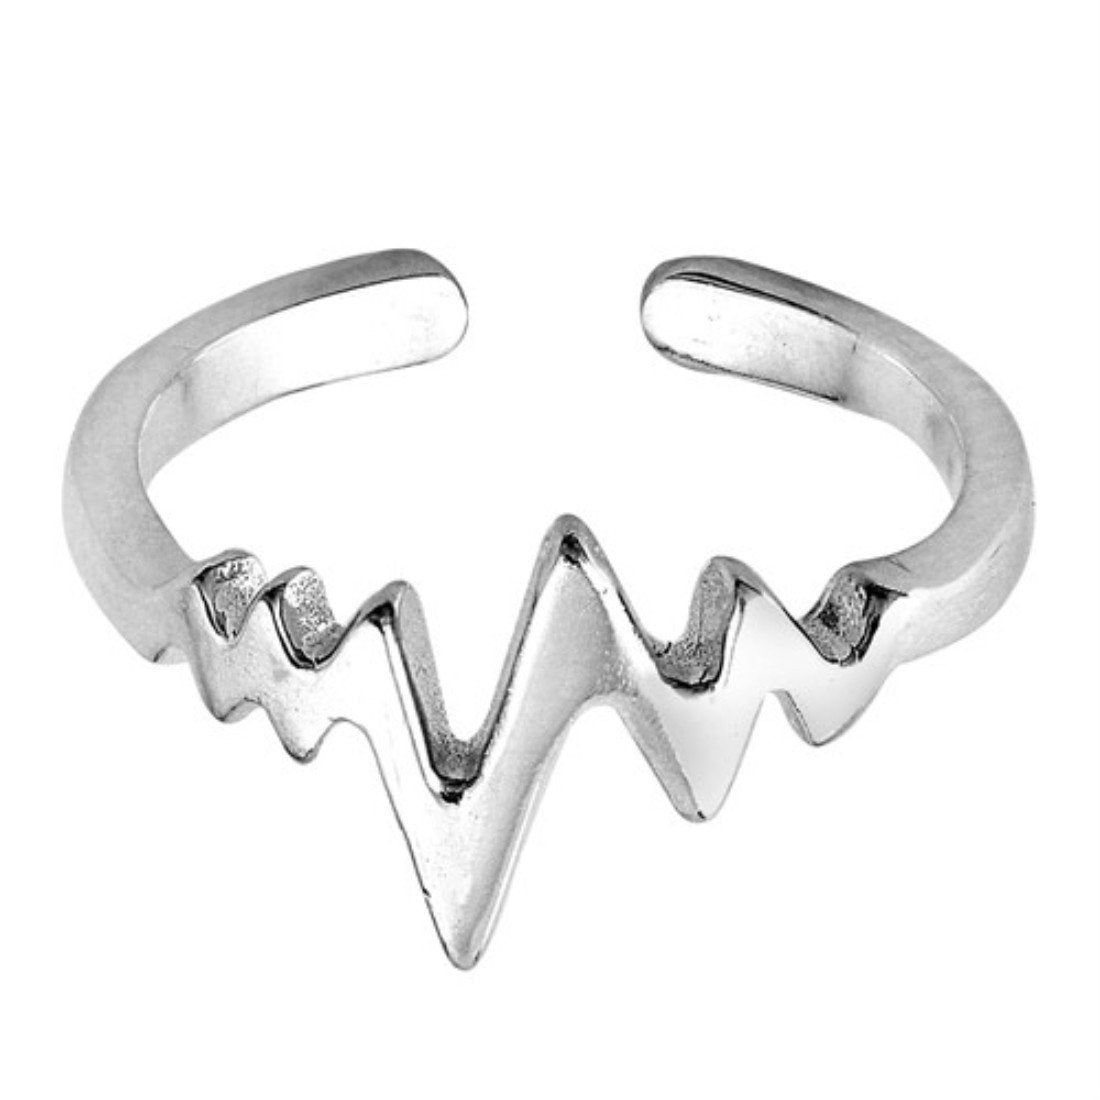 Heartbeat Silver Toe Ring Adjustable Band 925 Sterling Silver (8mm)